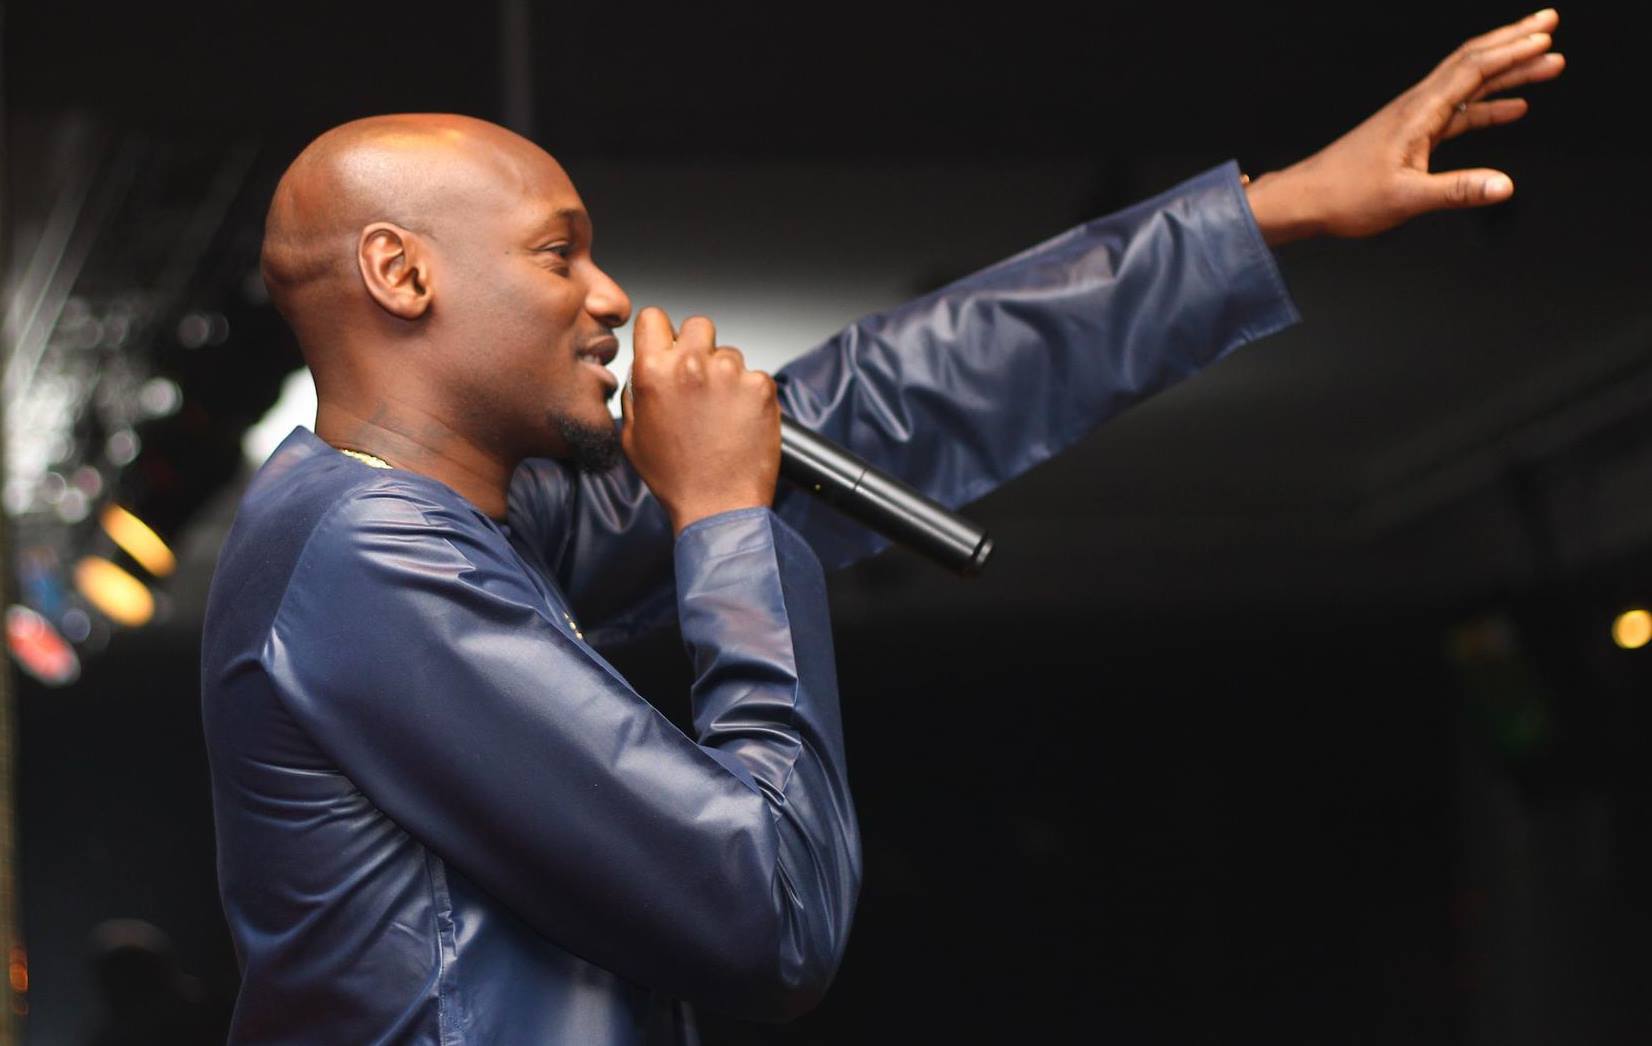 5 Quick Facts You Should Know About 2Face Idibia As He Turns 42 Today